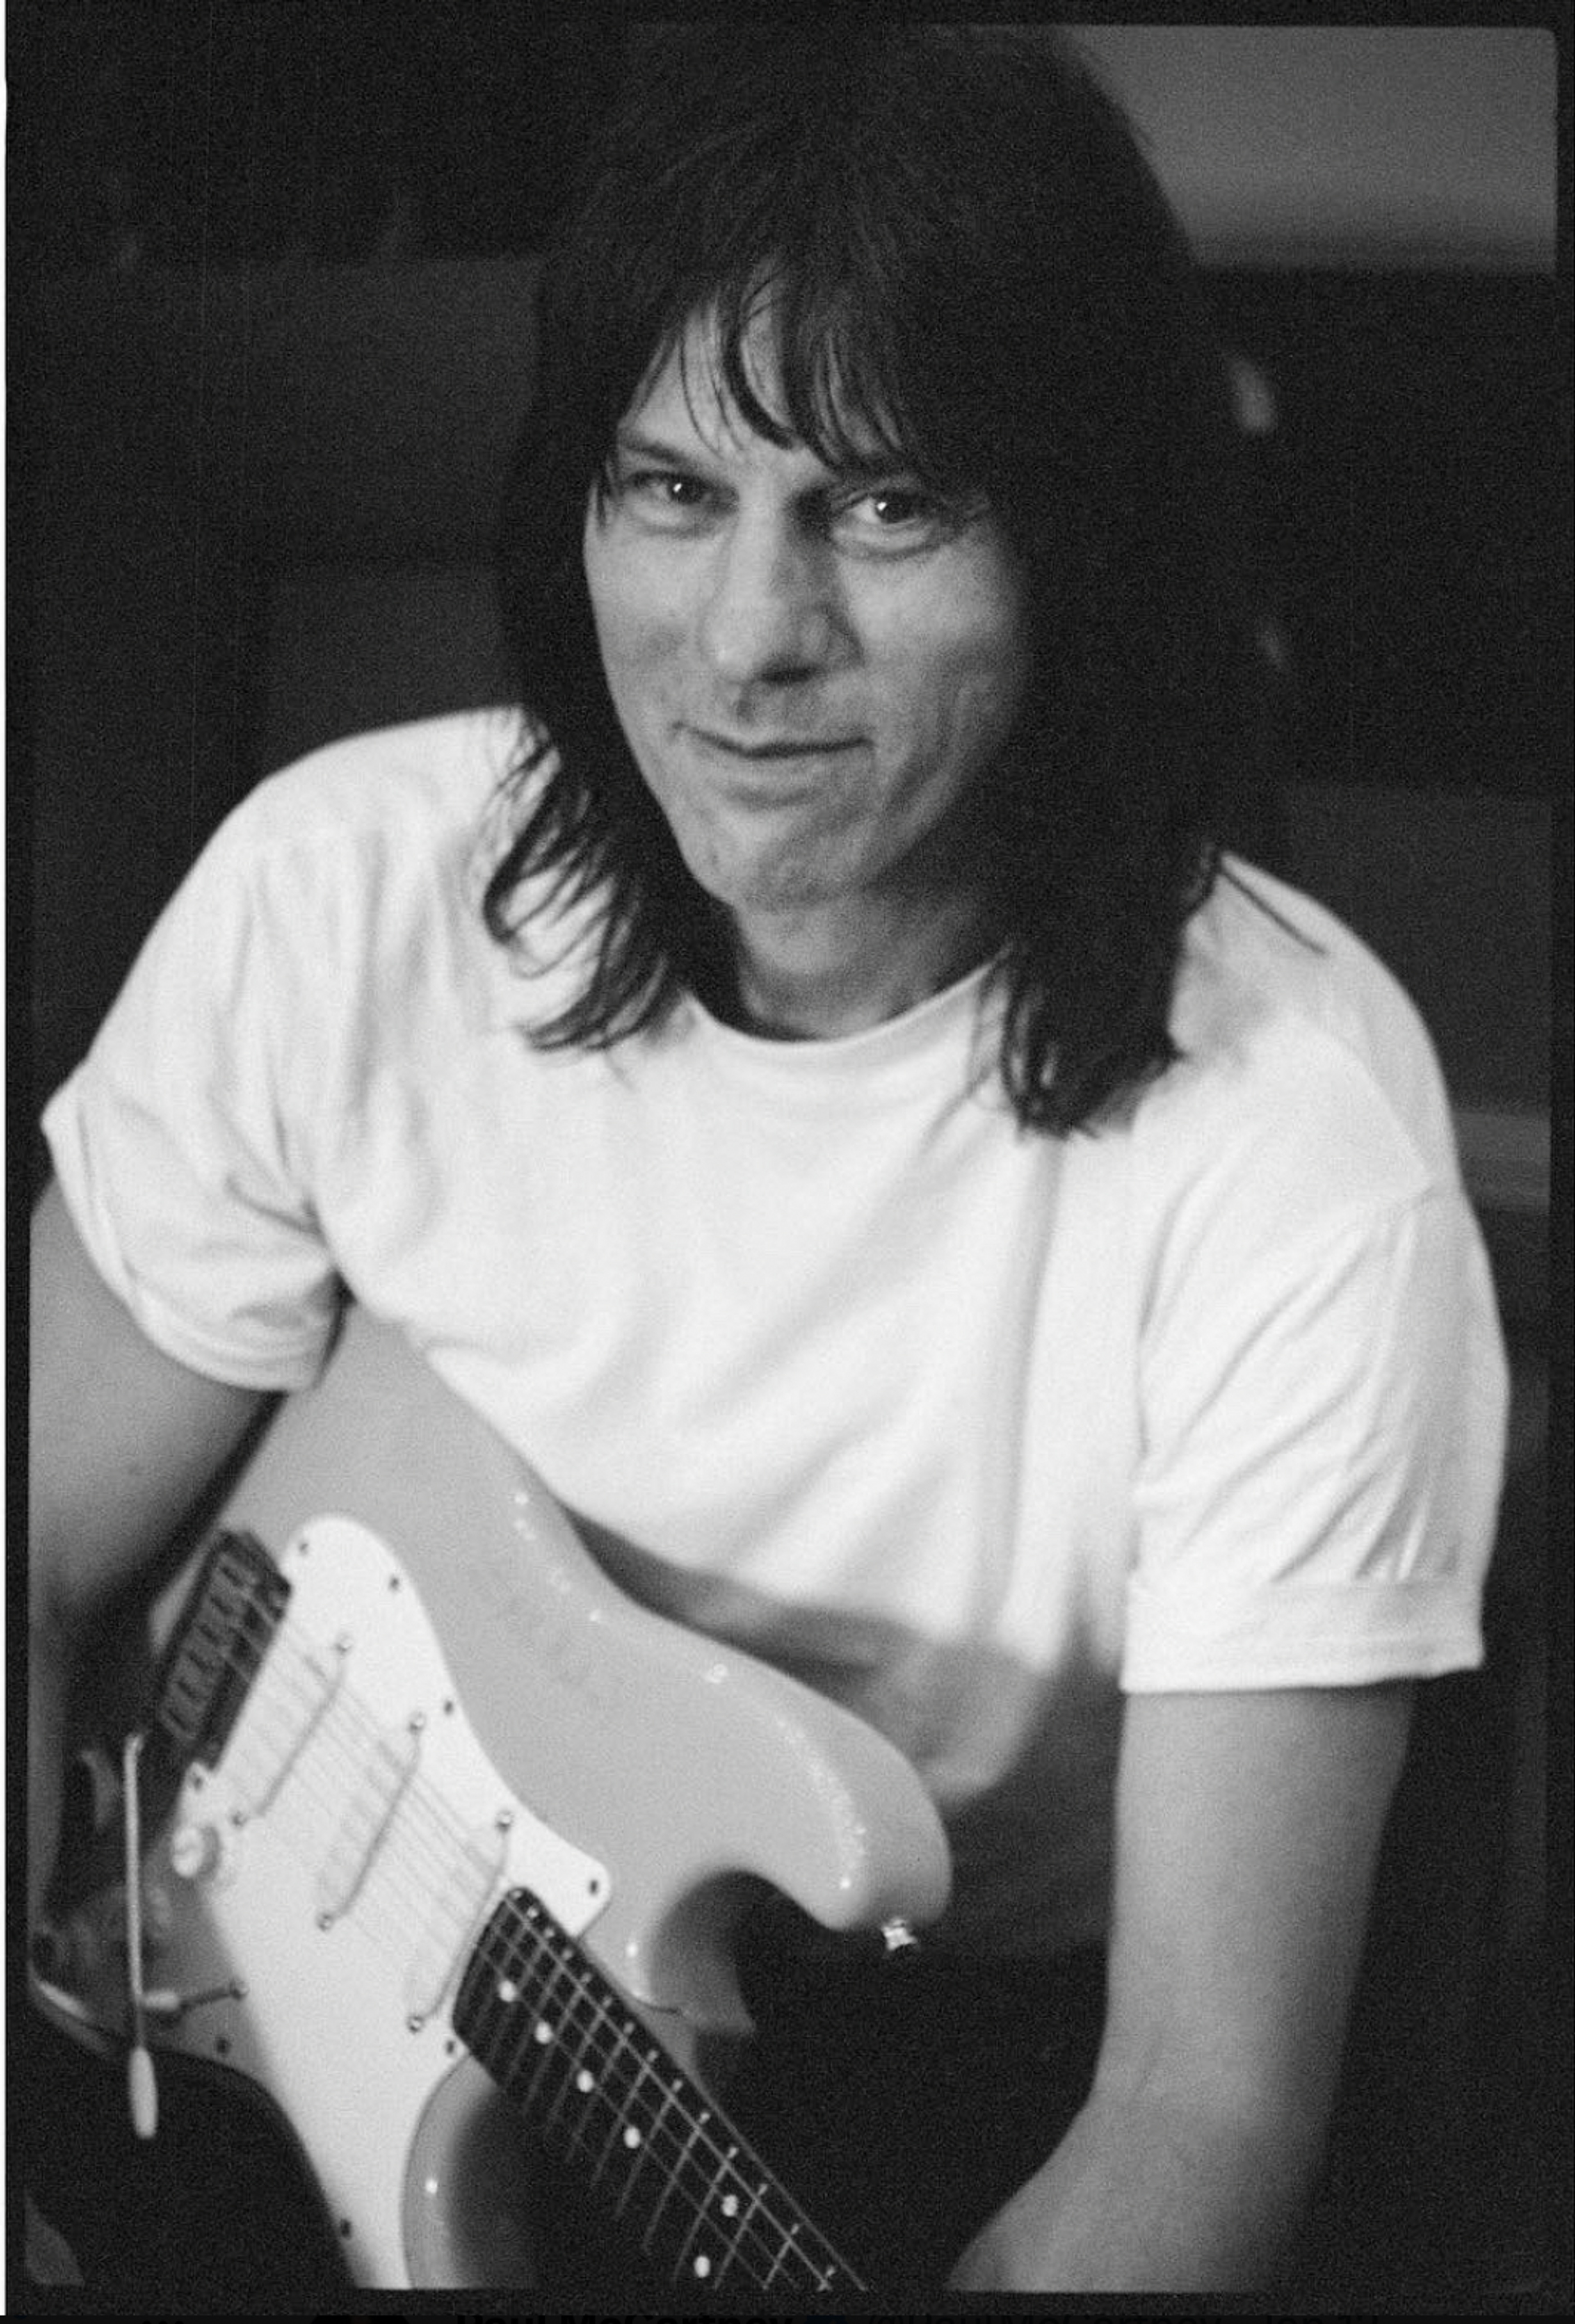 Black and white photograph of Jeff Beck taken by Linda McCartney in 1994